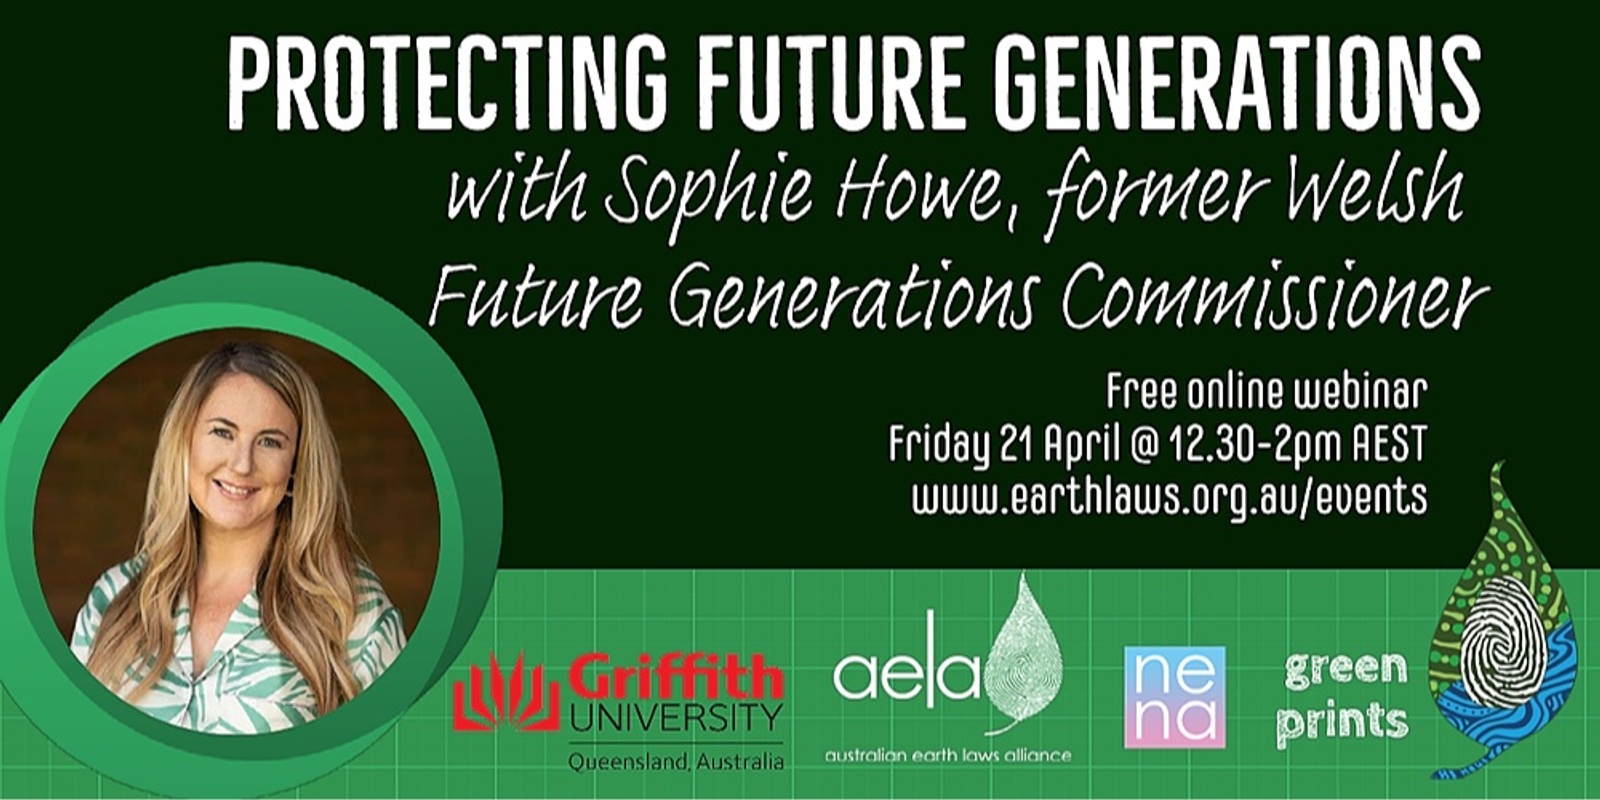 Banner image for Protecting Future Generations - with Sophie Howe, former Welsh Future Generations Commissioner